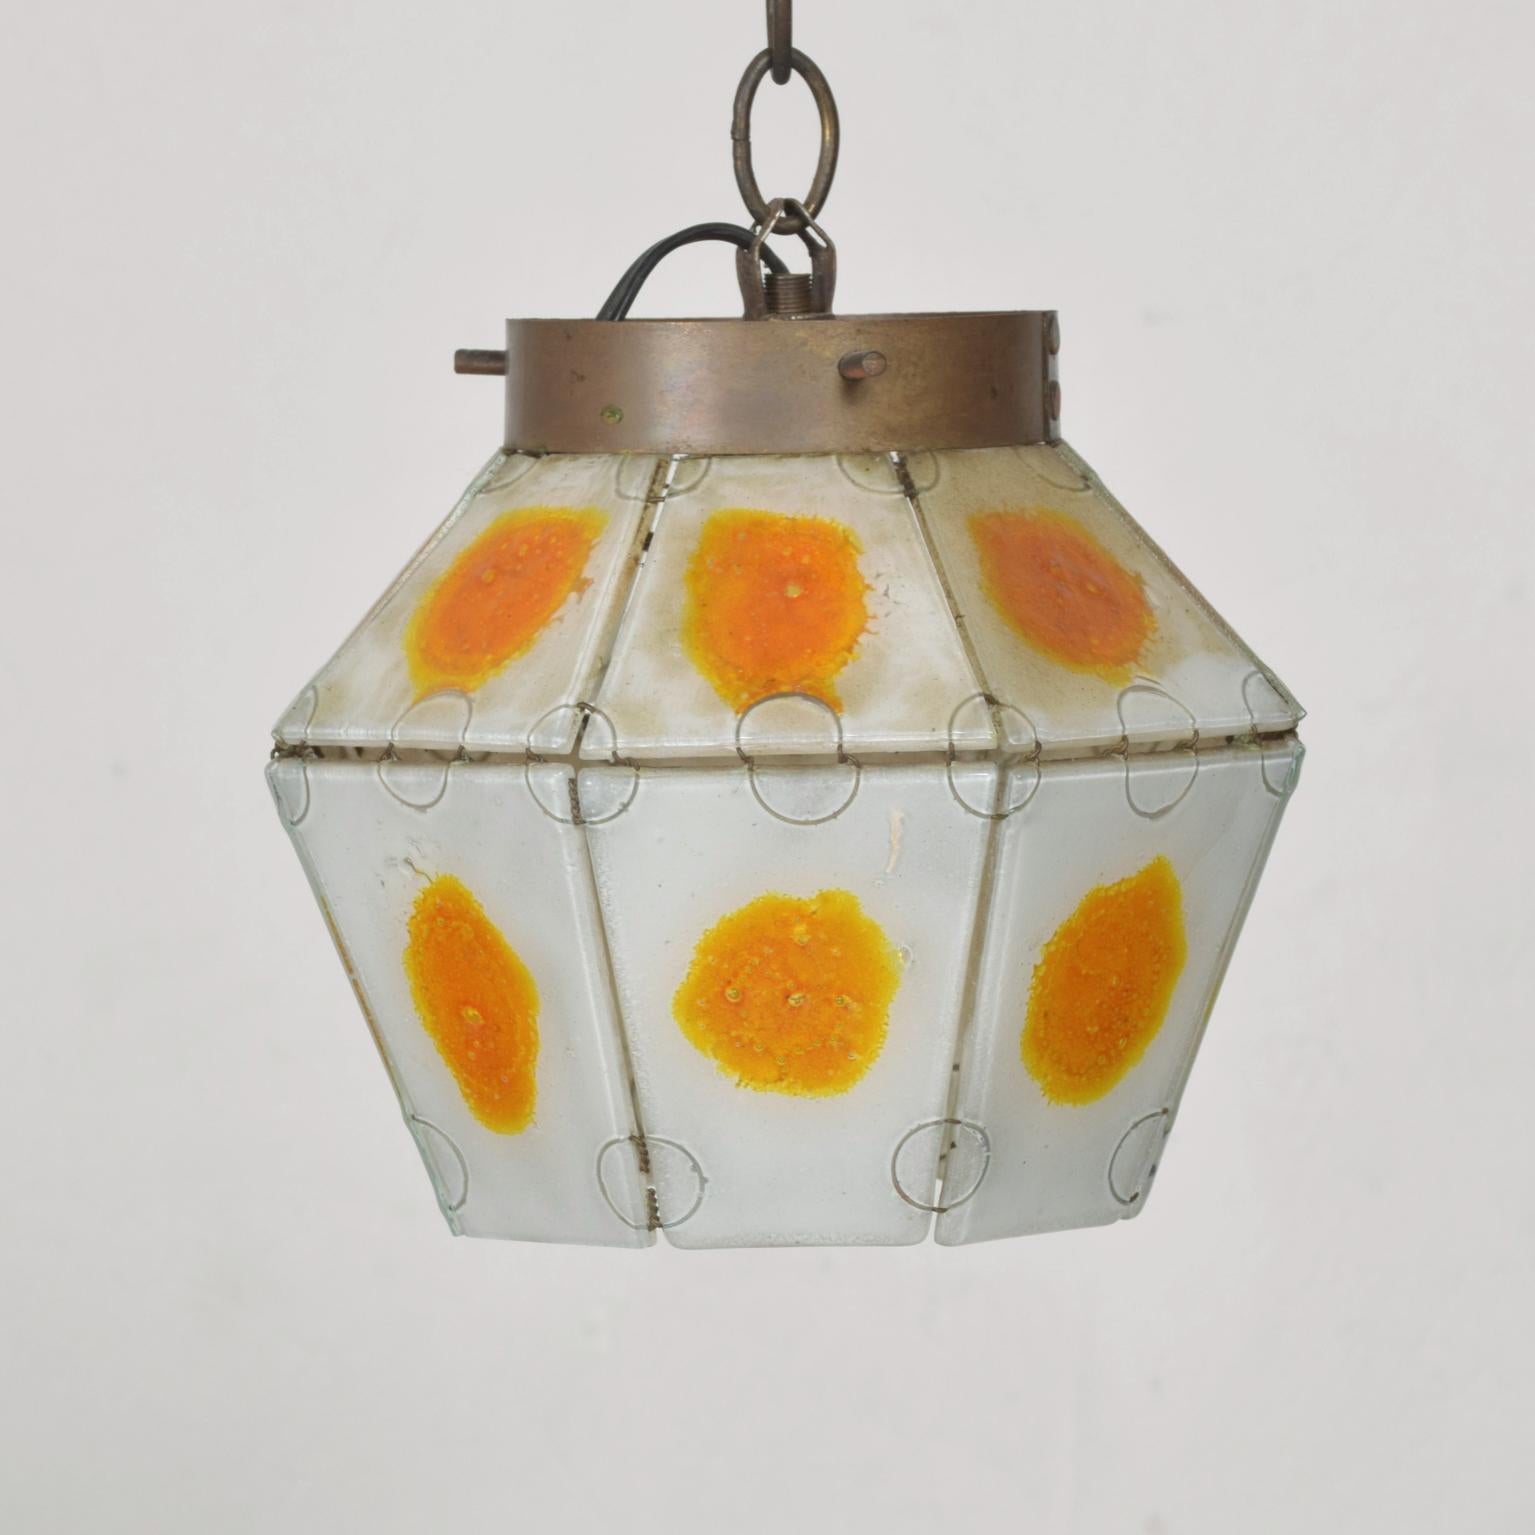 AMBIANIC presents
Mod midcentury custom stained glass Orange Lamp Shade by Feders Felipe Delfinger, Mexico 1960s
Shade measures: 7 H x 8 In diameter
Original unrestored vintage preowned condition.
Please refer to images.

